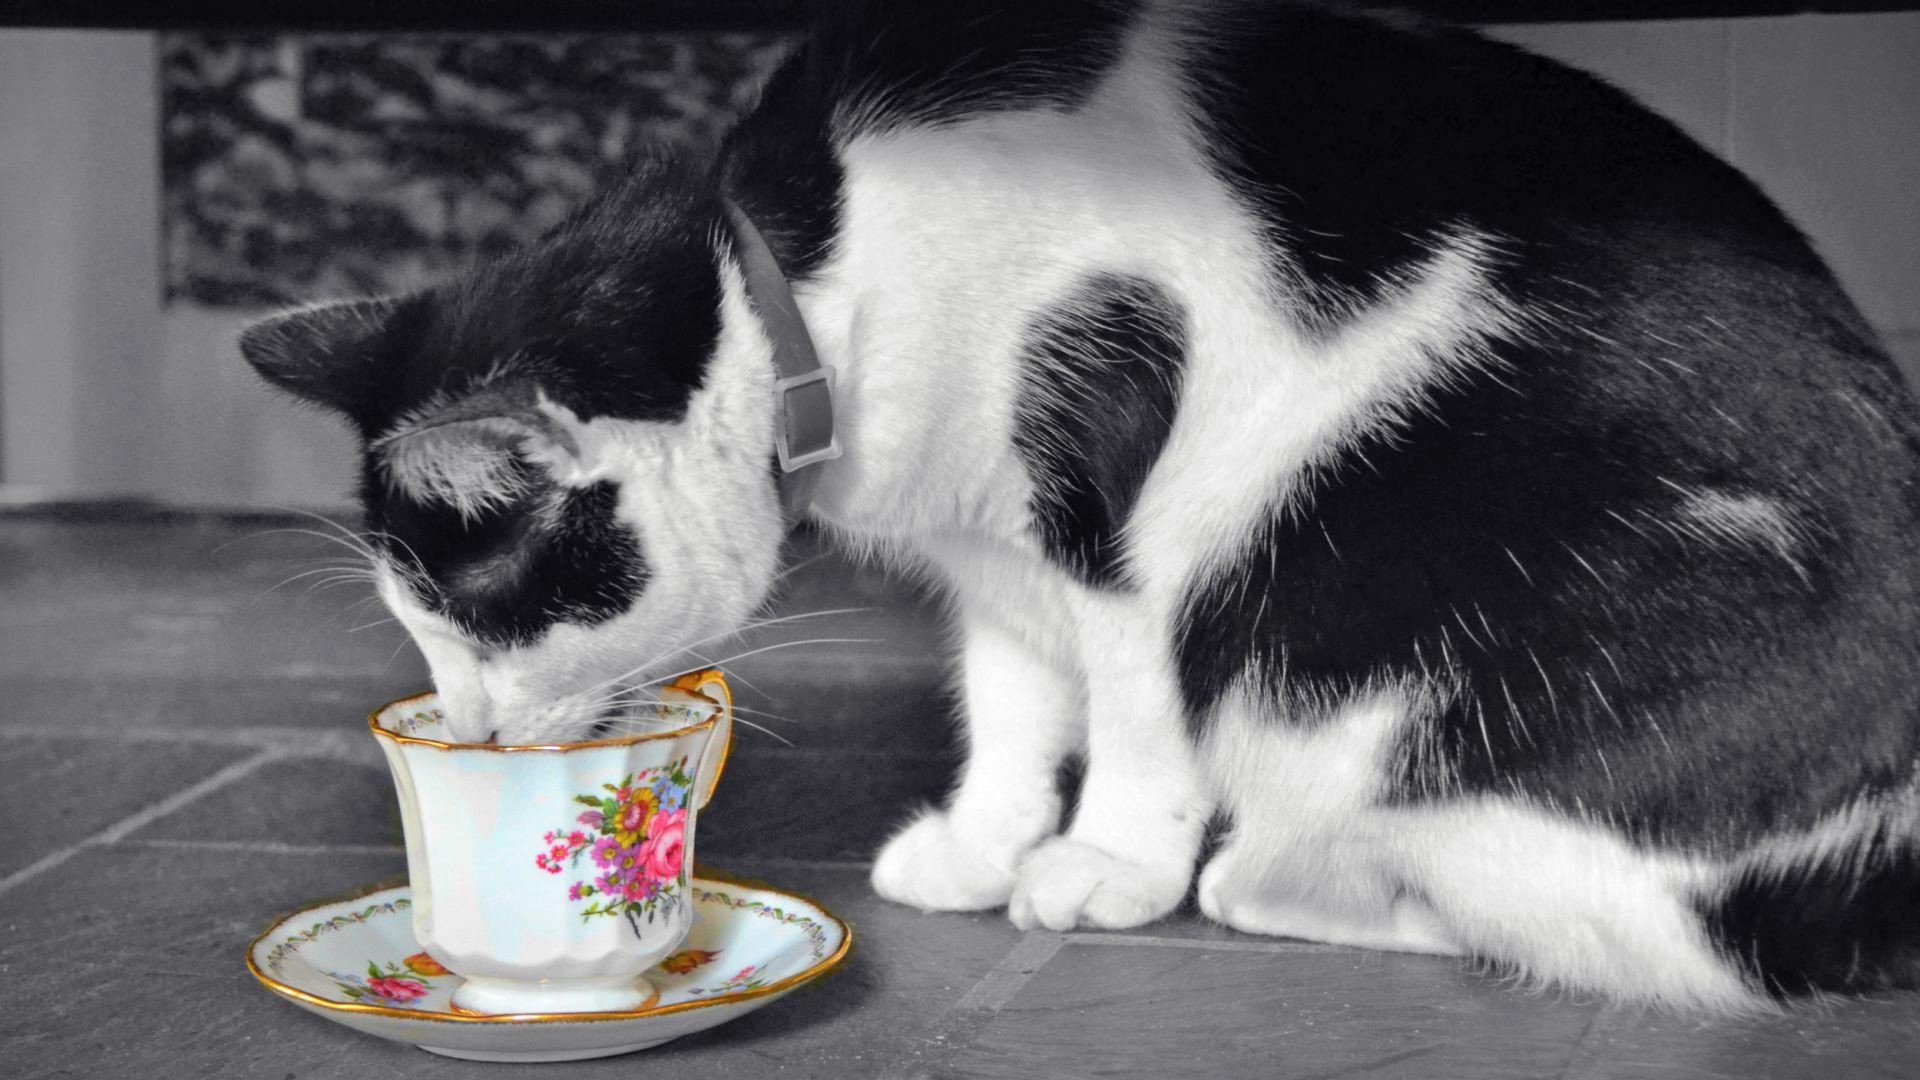 1920x1080 Cute Wallpapers Cat Picture Of Black White Cat Wallpaper Drinking From The  Cup